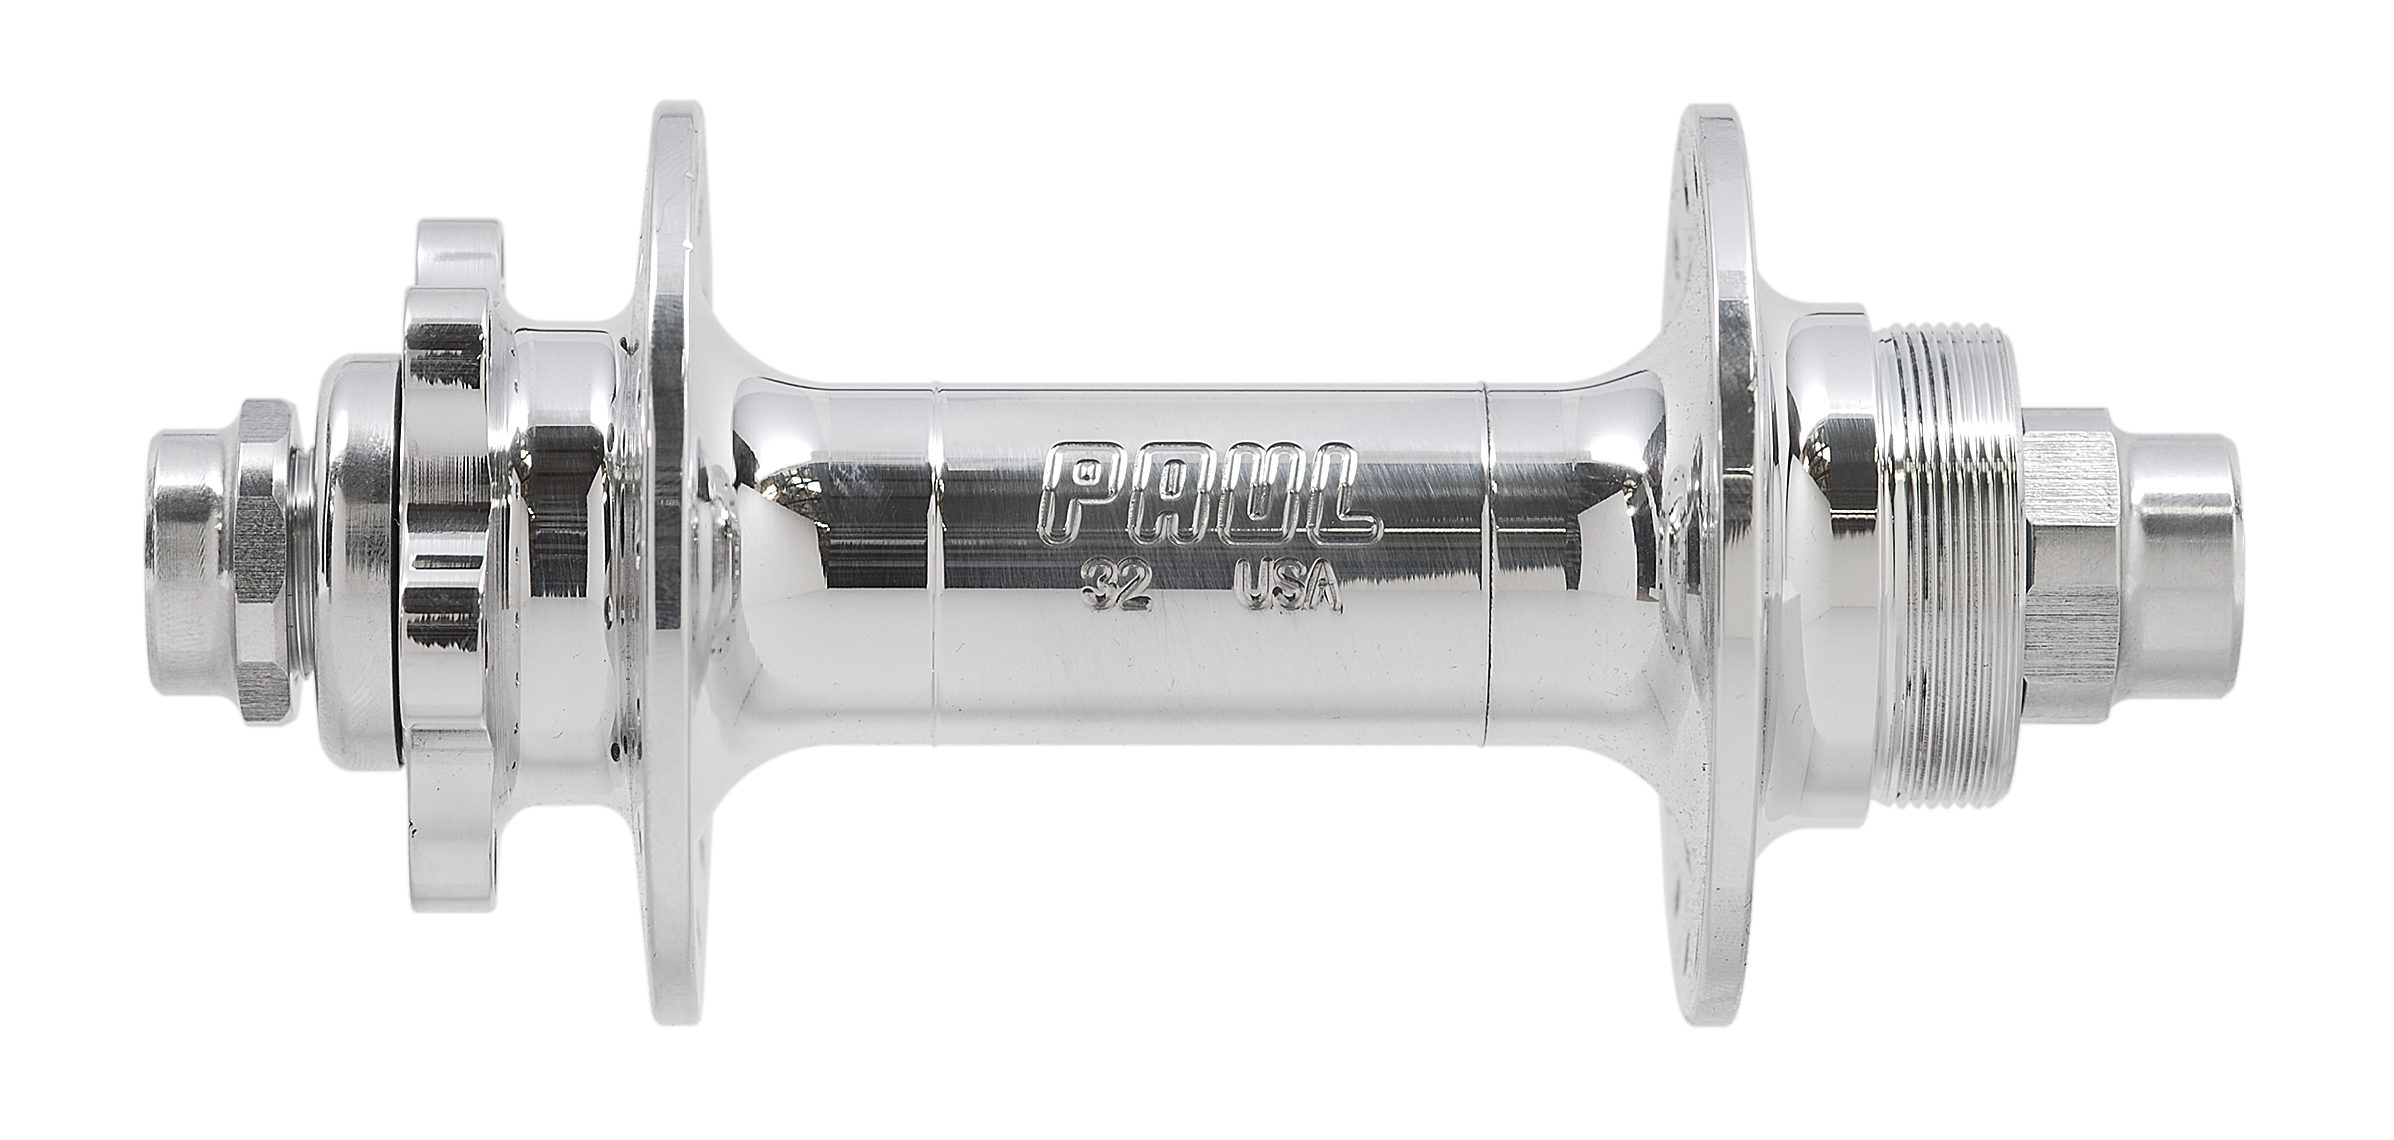 Boost is the WORD for new Single Speed hubs from PAUL